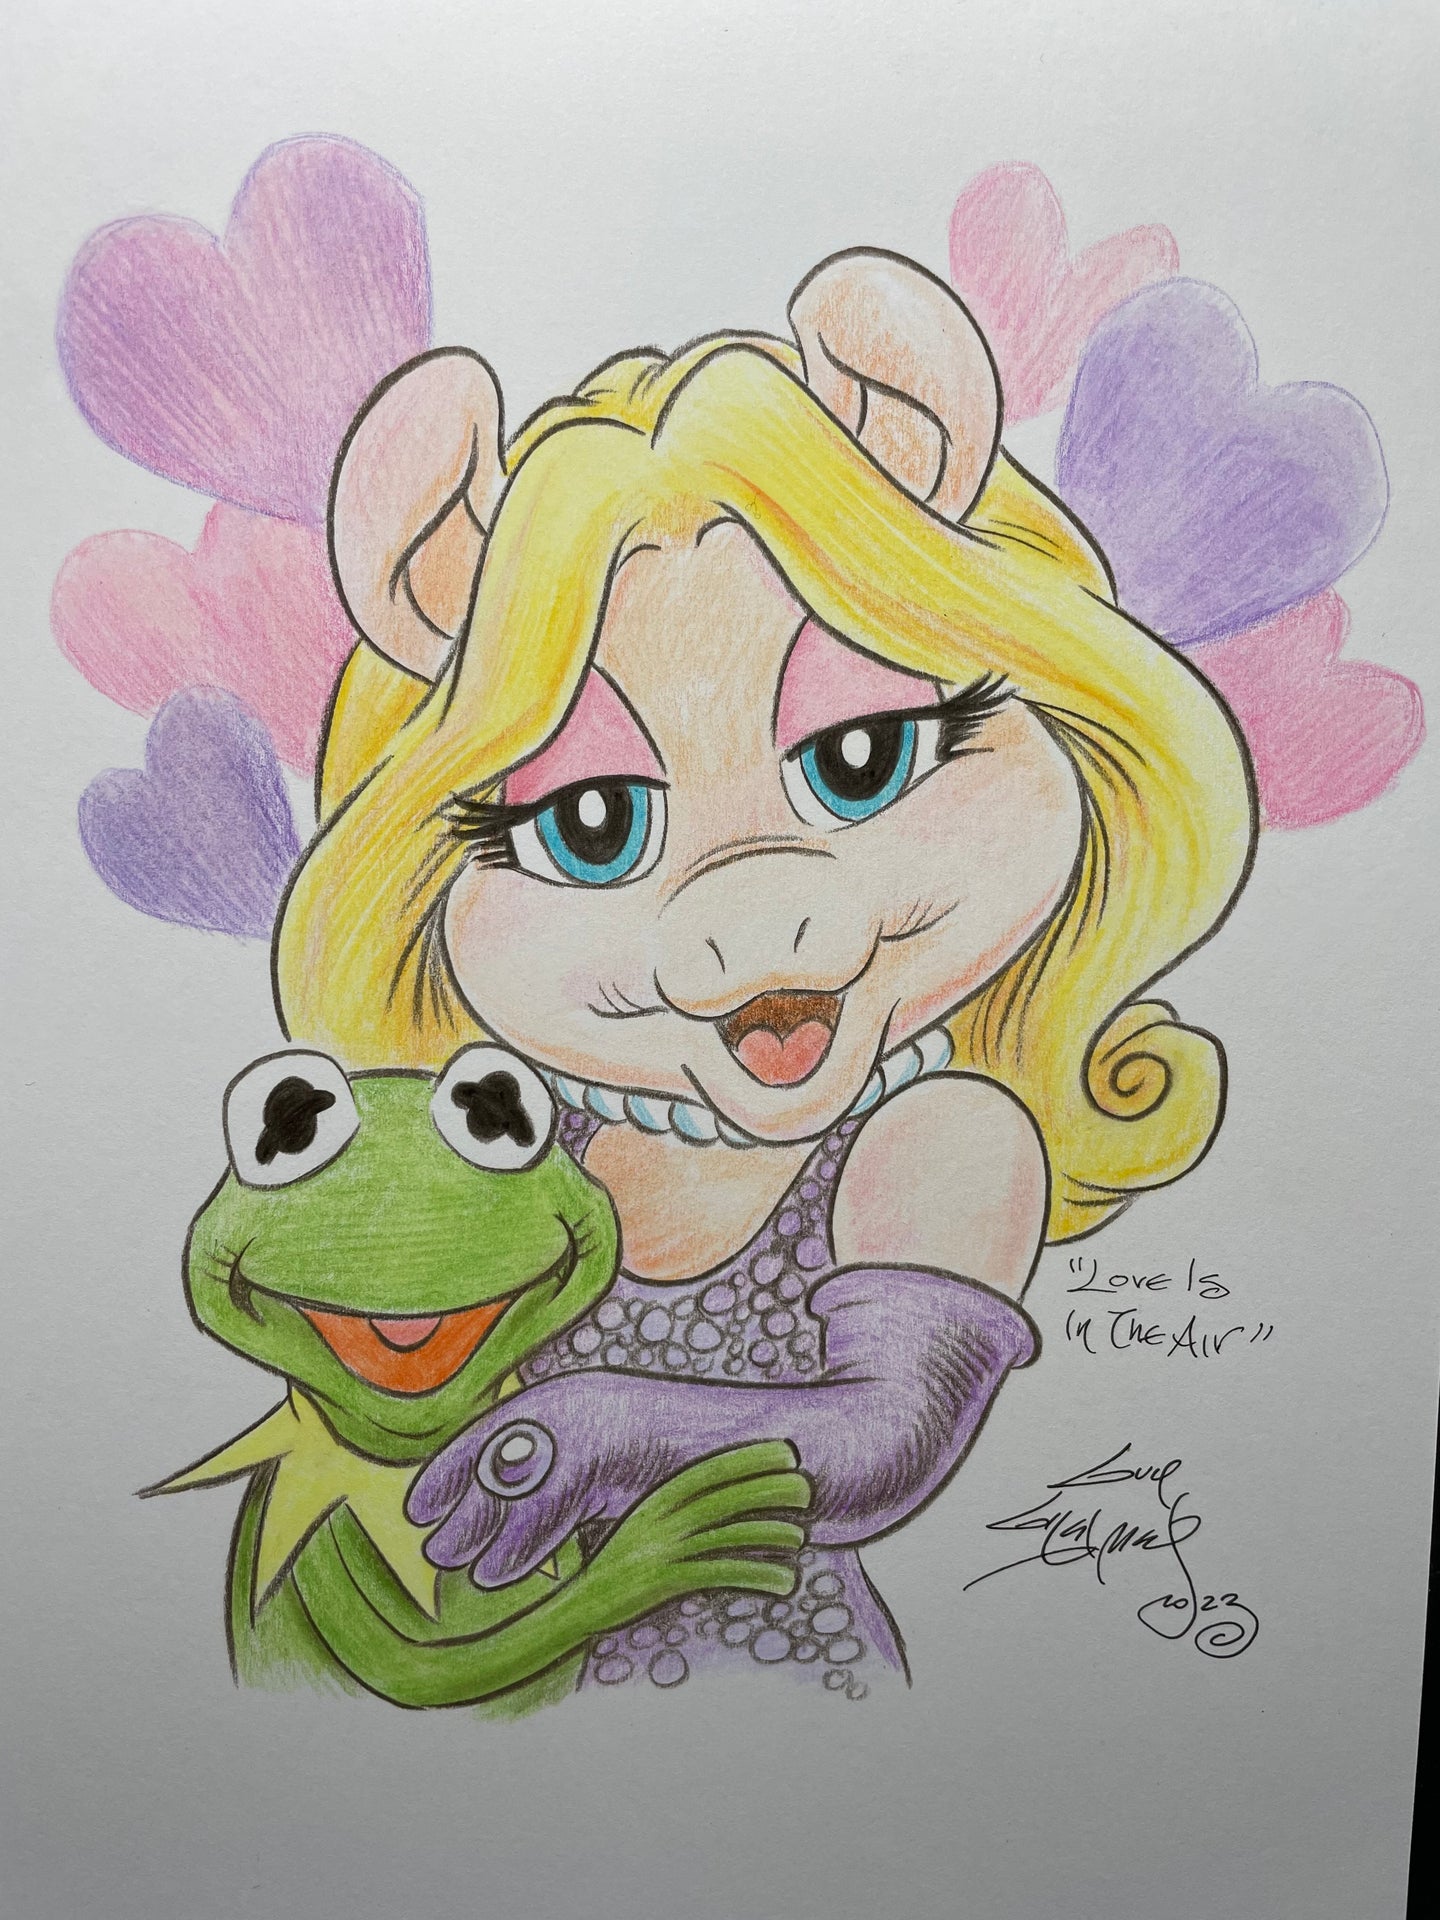 Miss Piggy and Kermit with Hearts Original Art 8.5x11 Sketch - Created by Guy Gilchrist